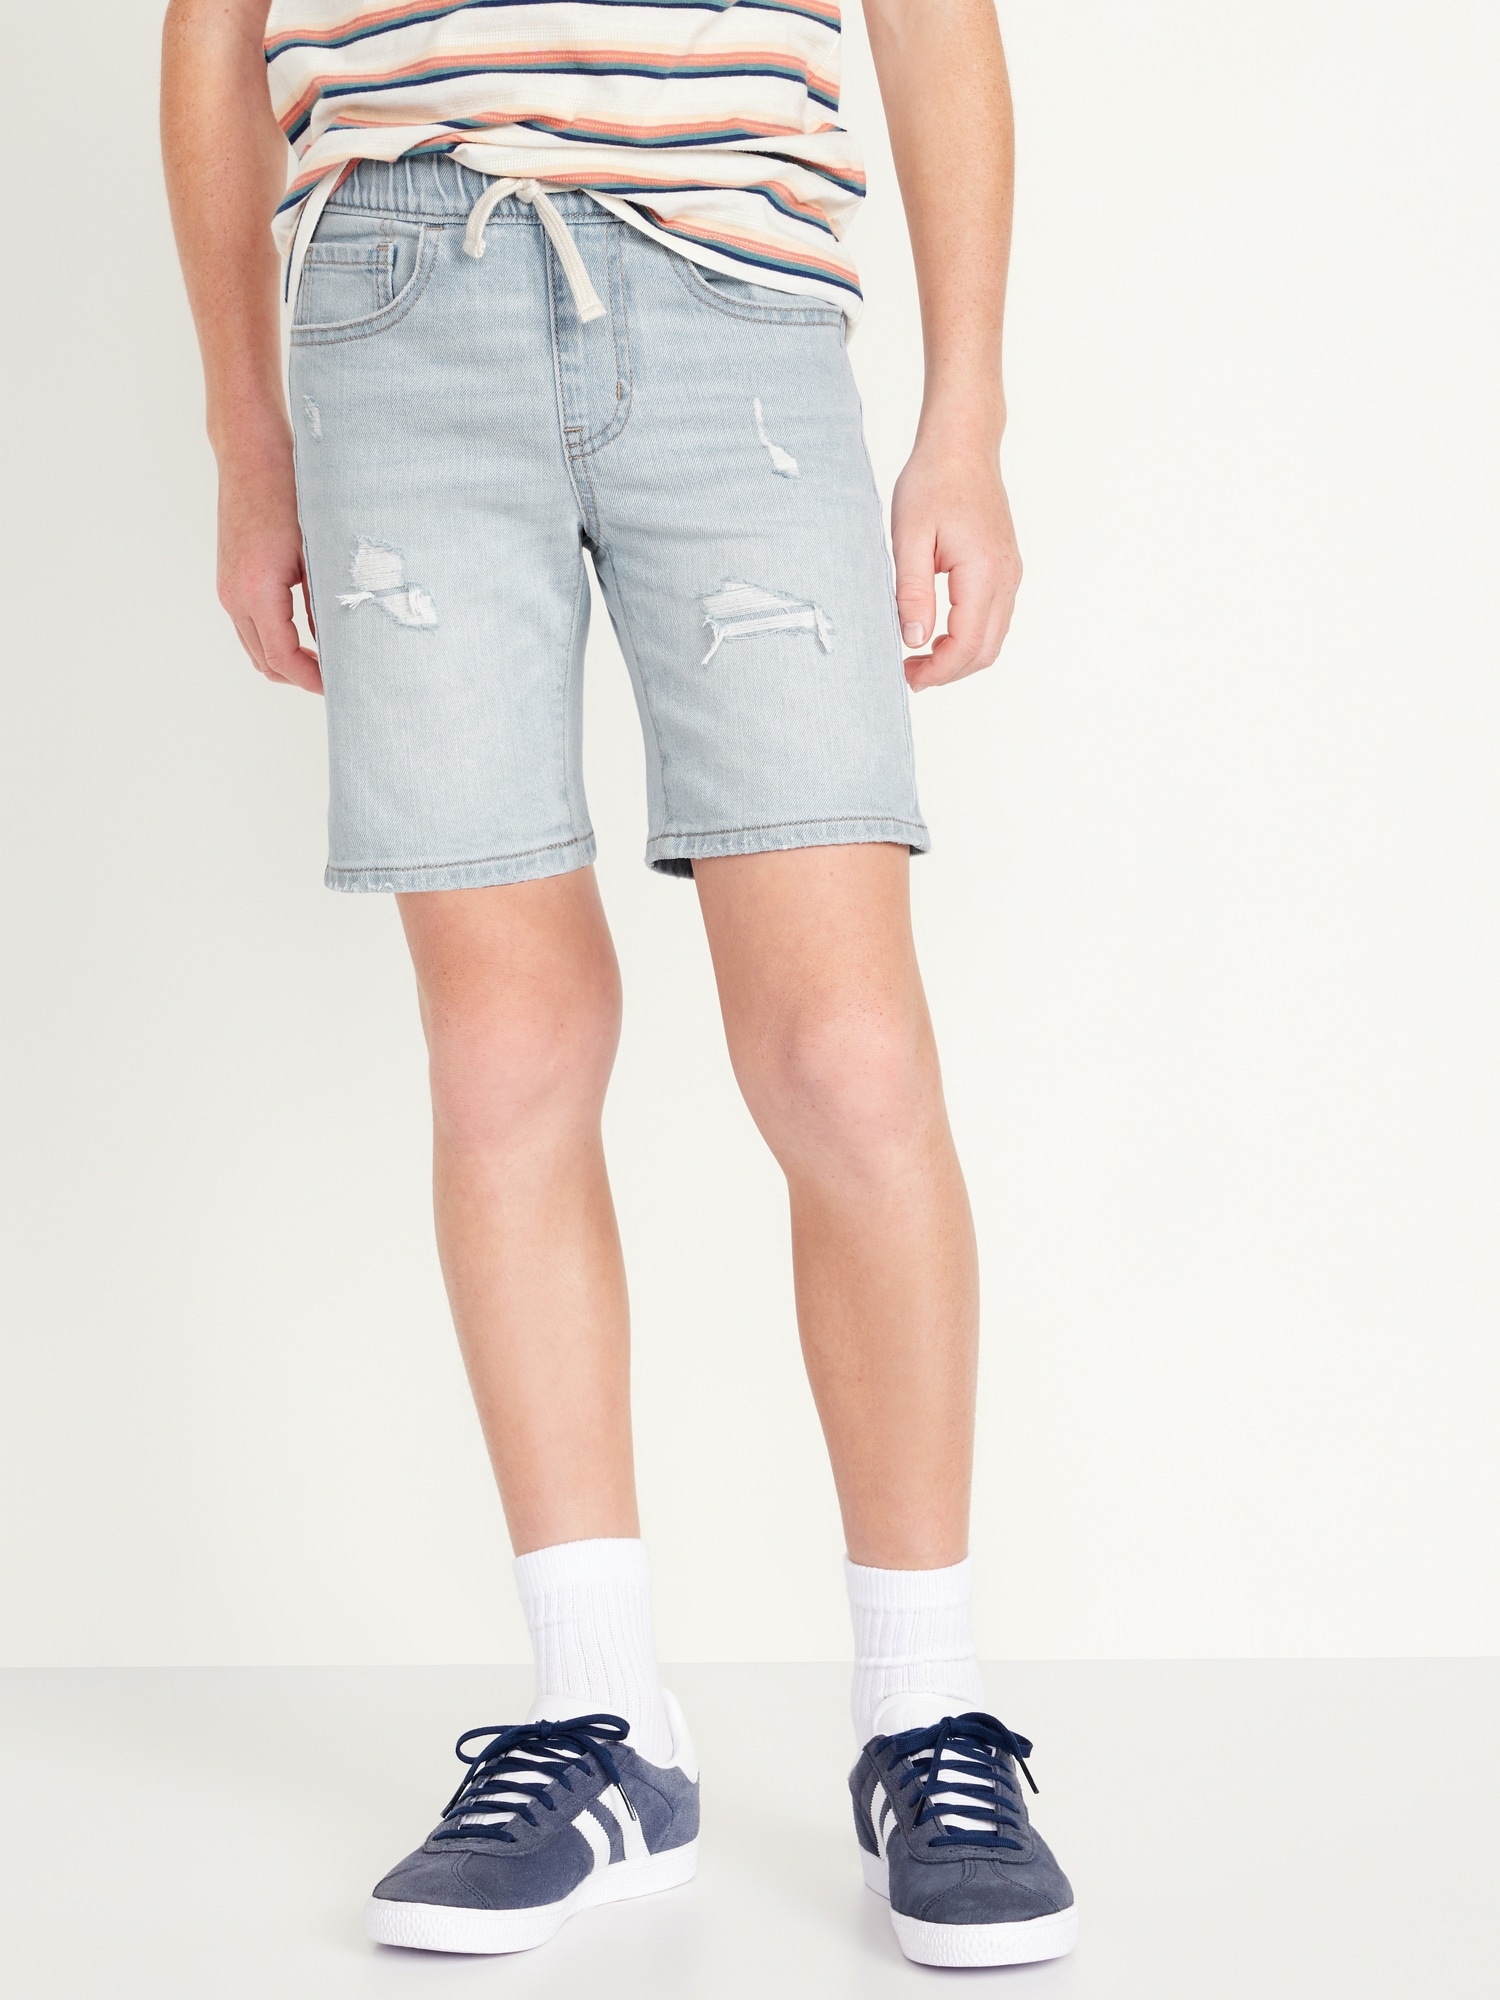 Knee Length 360 Stretch Pull-On Jean Shorts for Boys